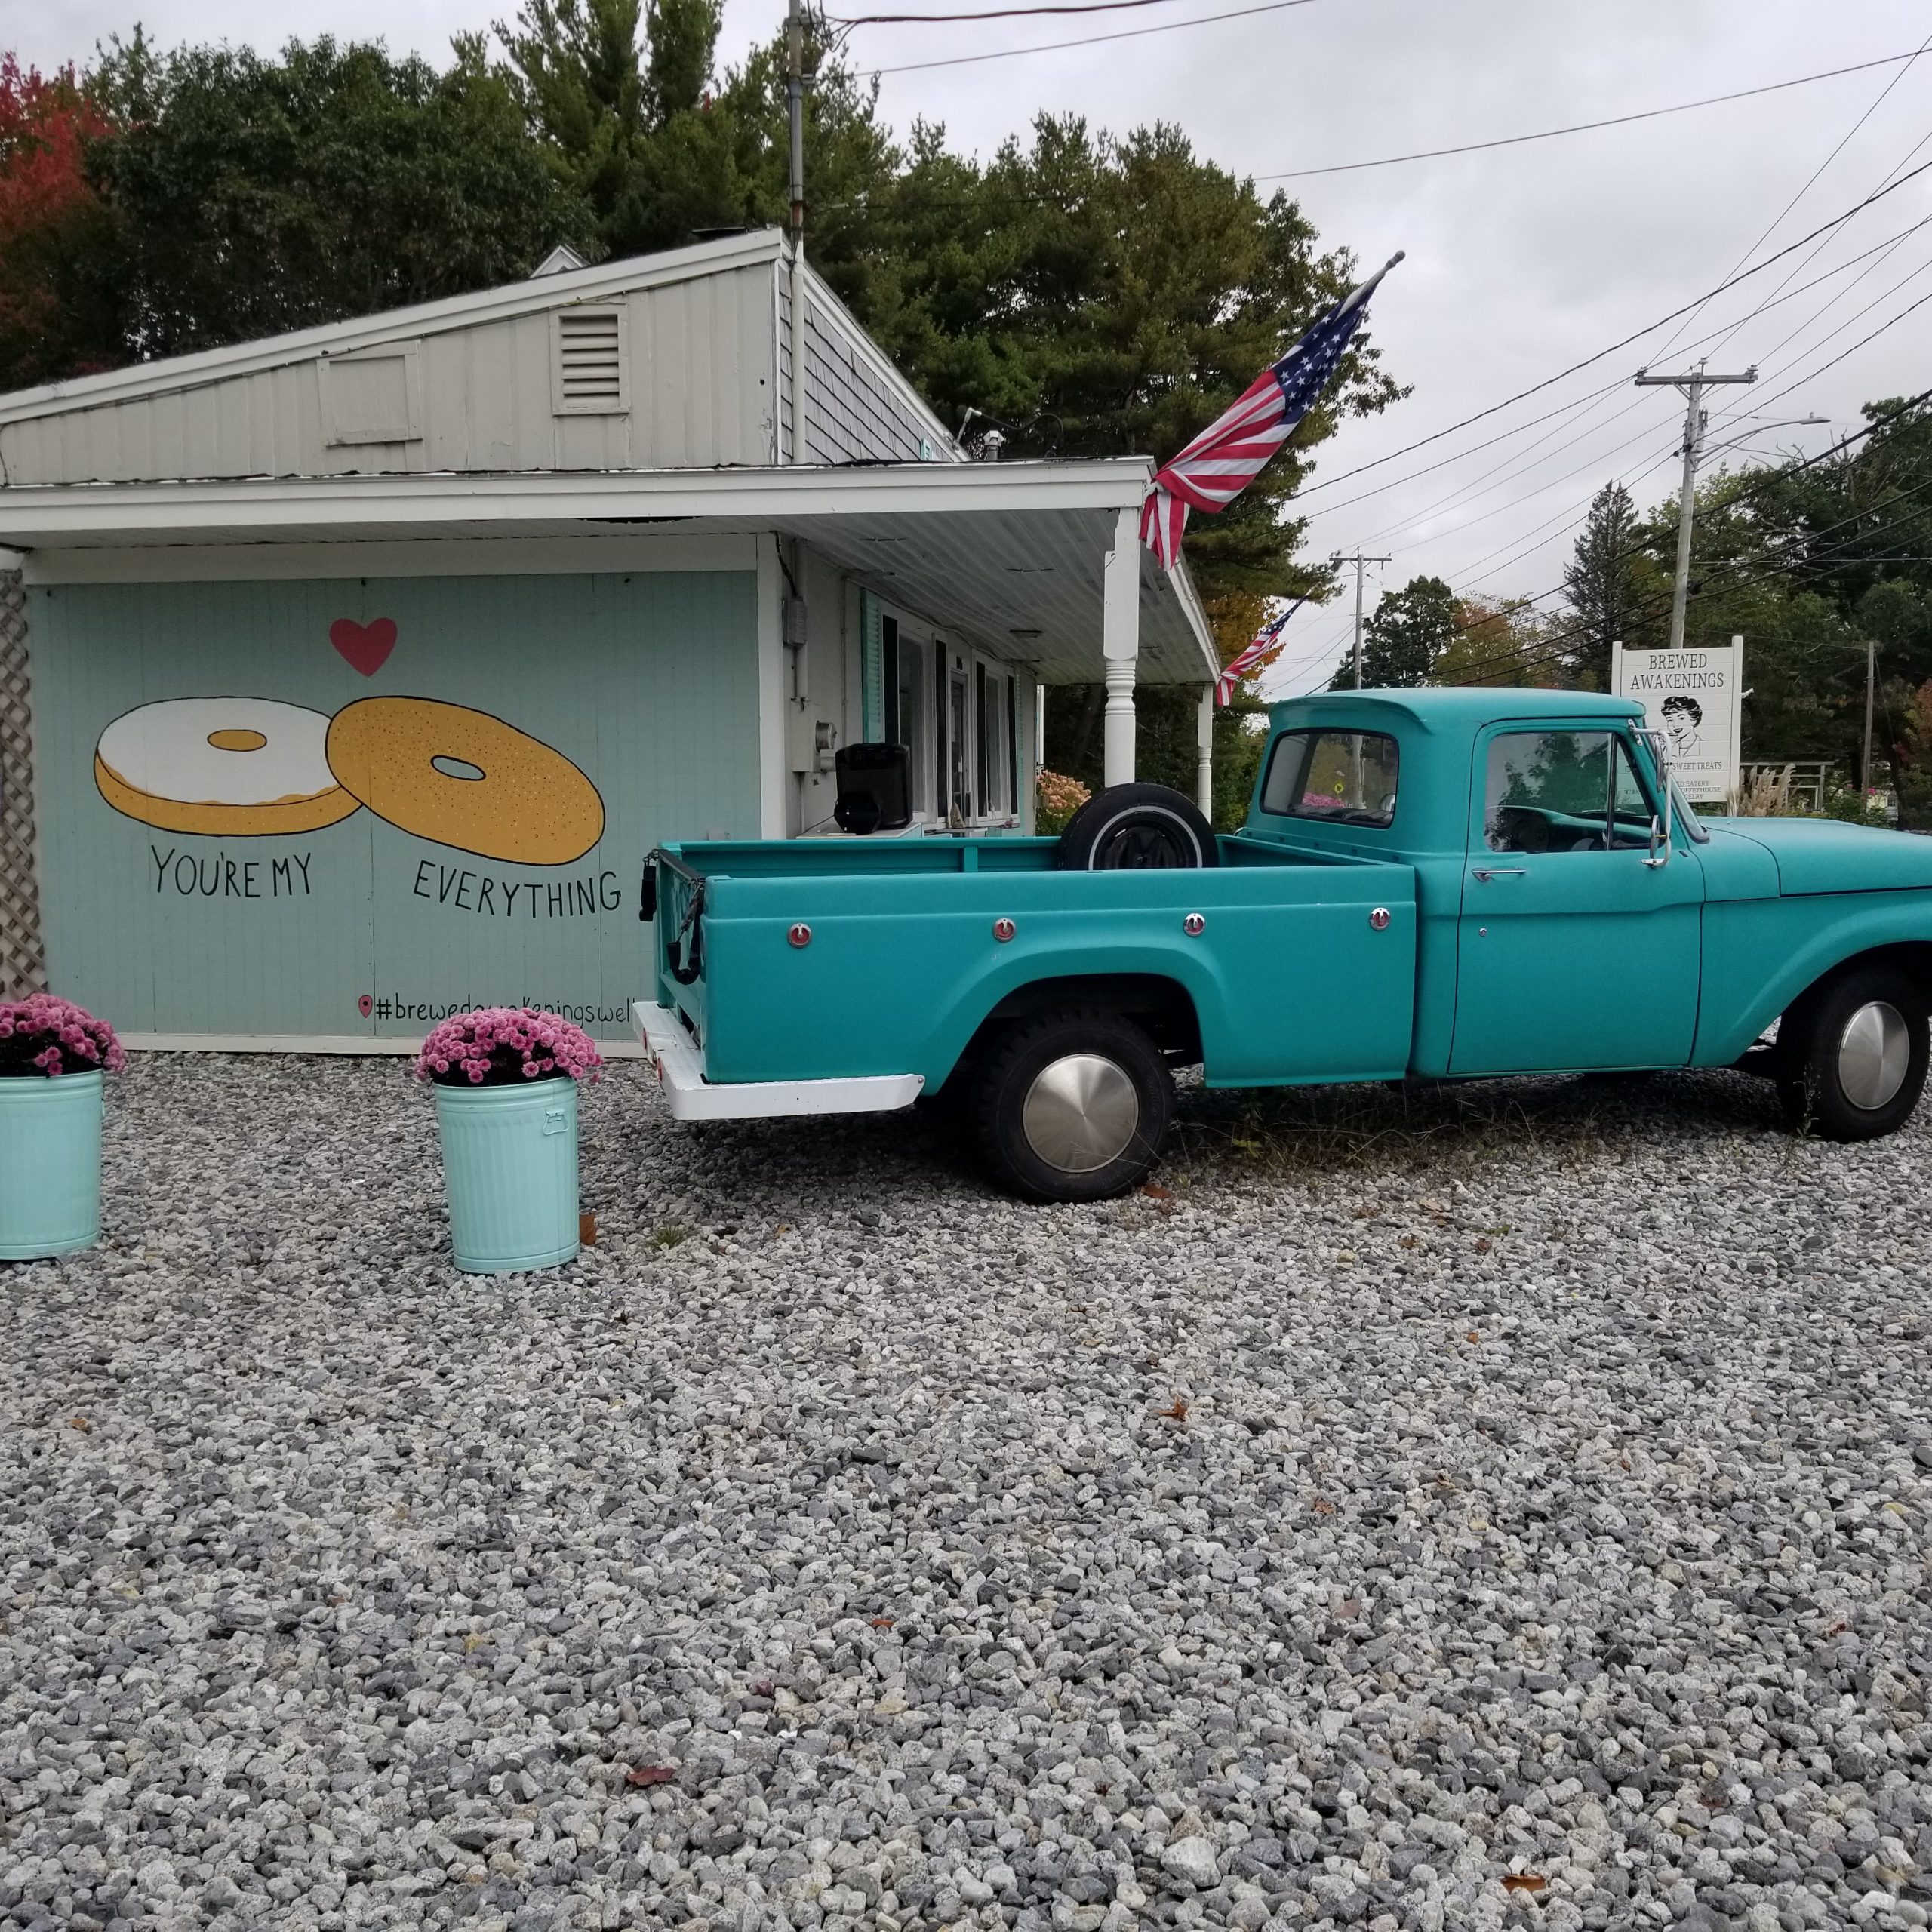 Brewed Awakenings is a coffee shop on the way to Kennebunkport, ME with a cute little photo opportunity with a teal truck and cute mural.